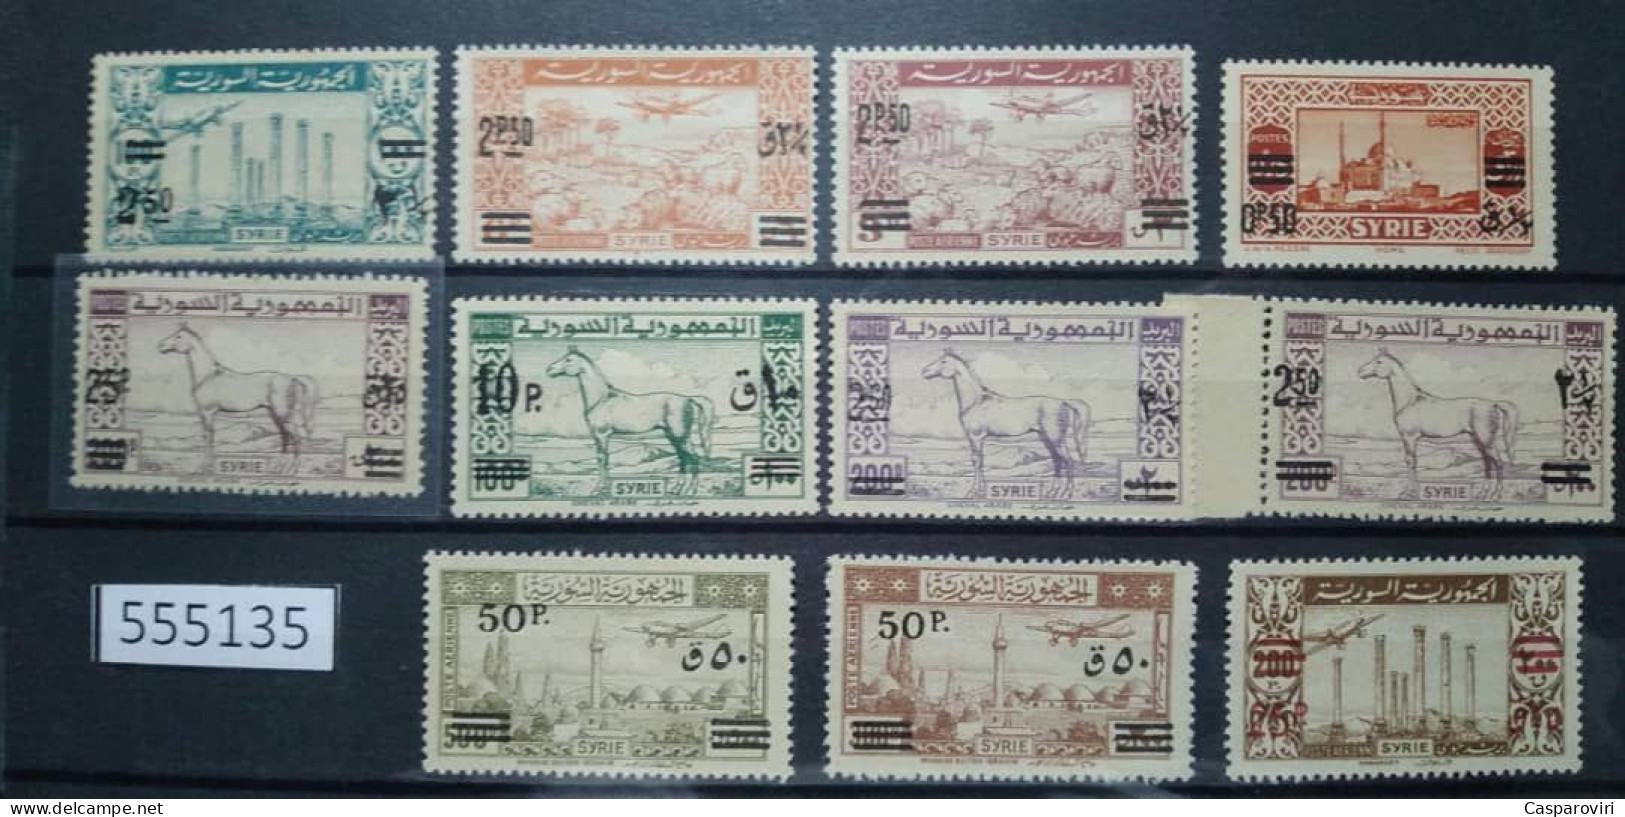 555135; Syria; 1948; Provisional 1948-50; New Value Surcharged; MNH** - Syrien